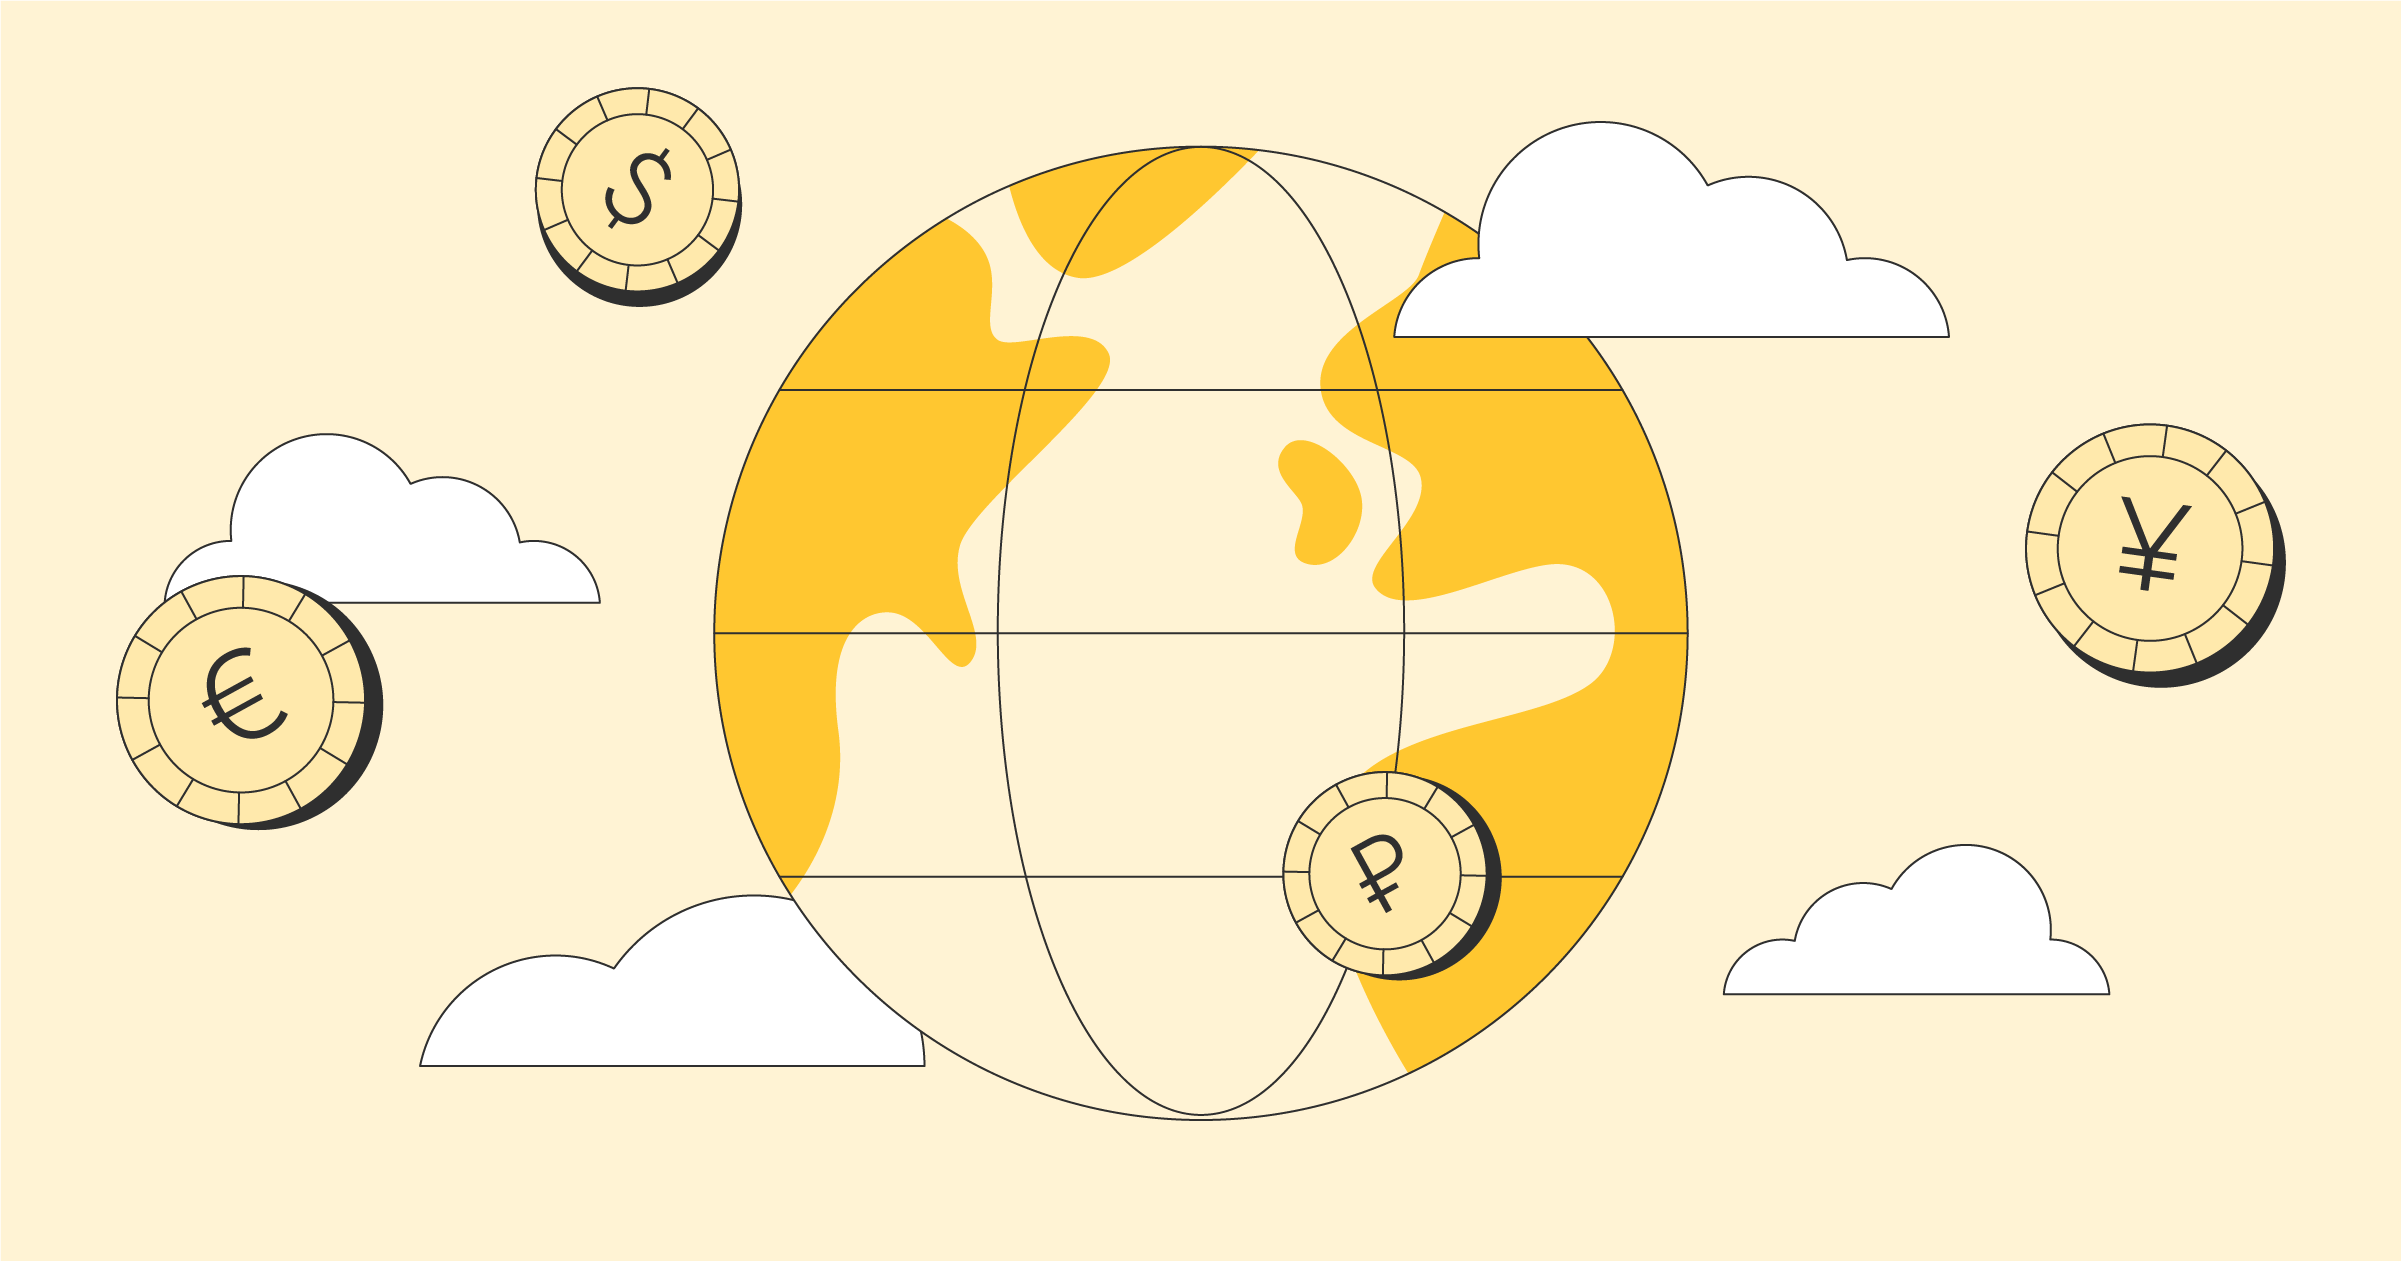 A globe in the clouds is surrounded by currency, representing foreign exchange risk.